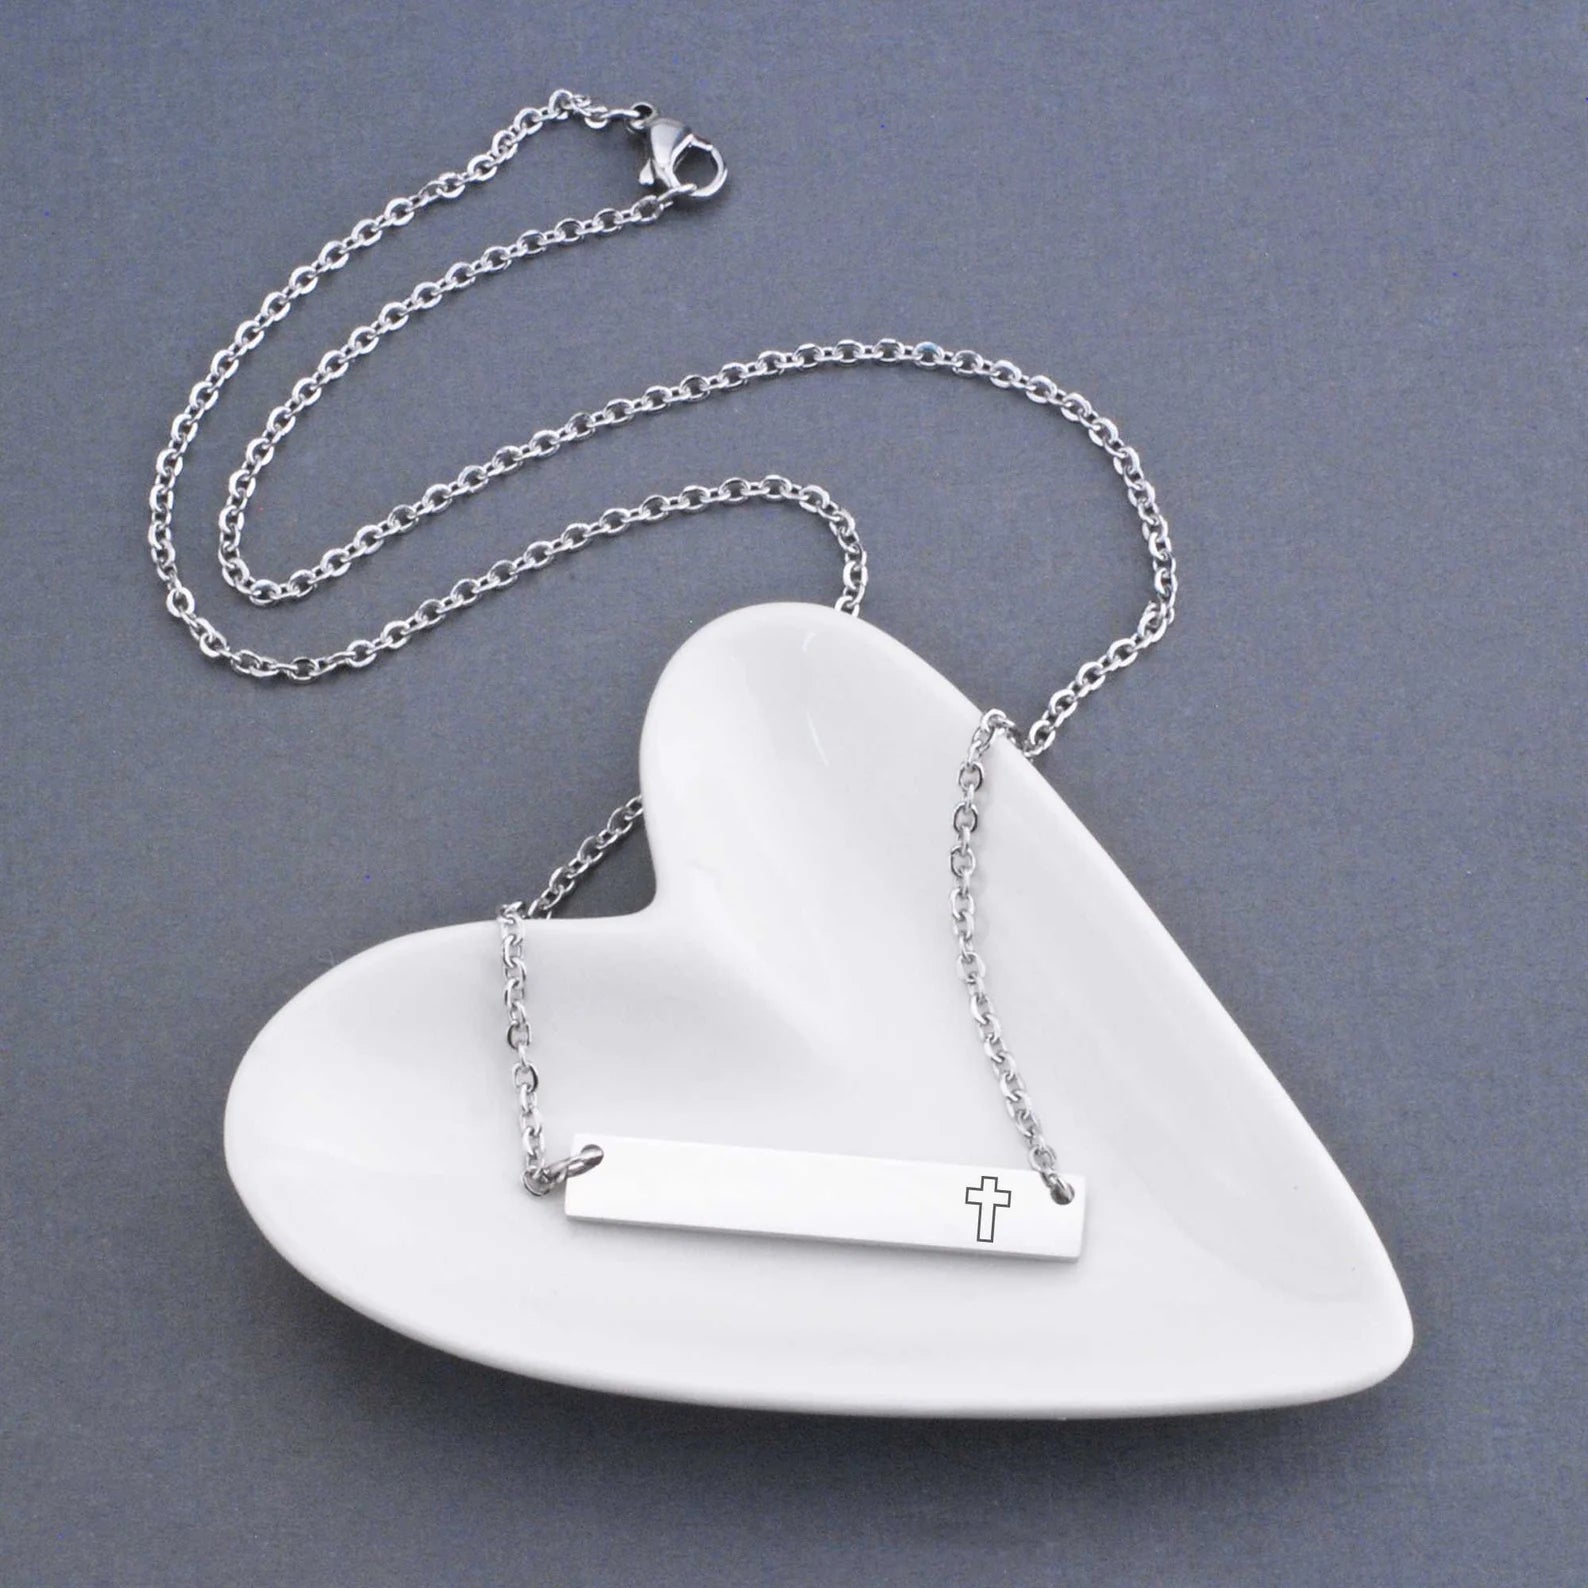 First Communion or Confirmation Necklace